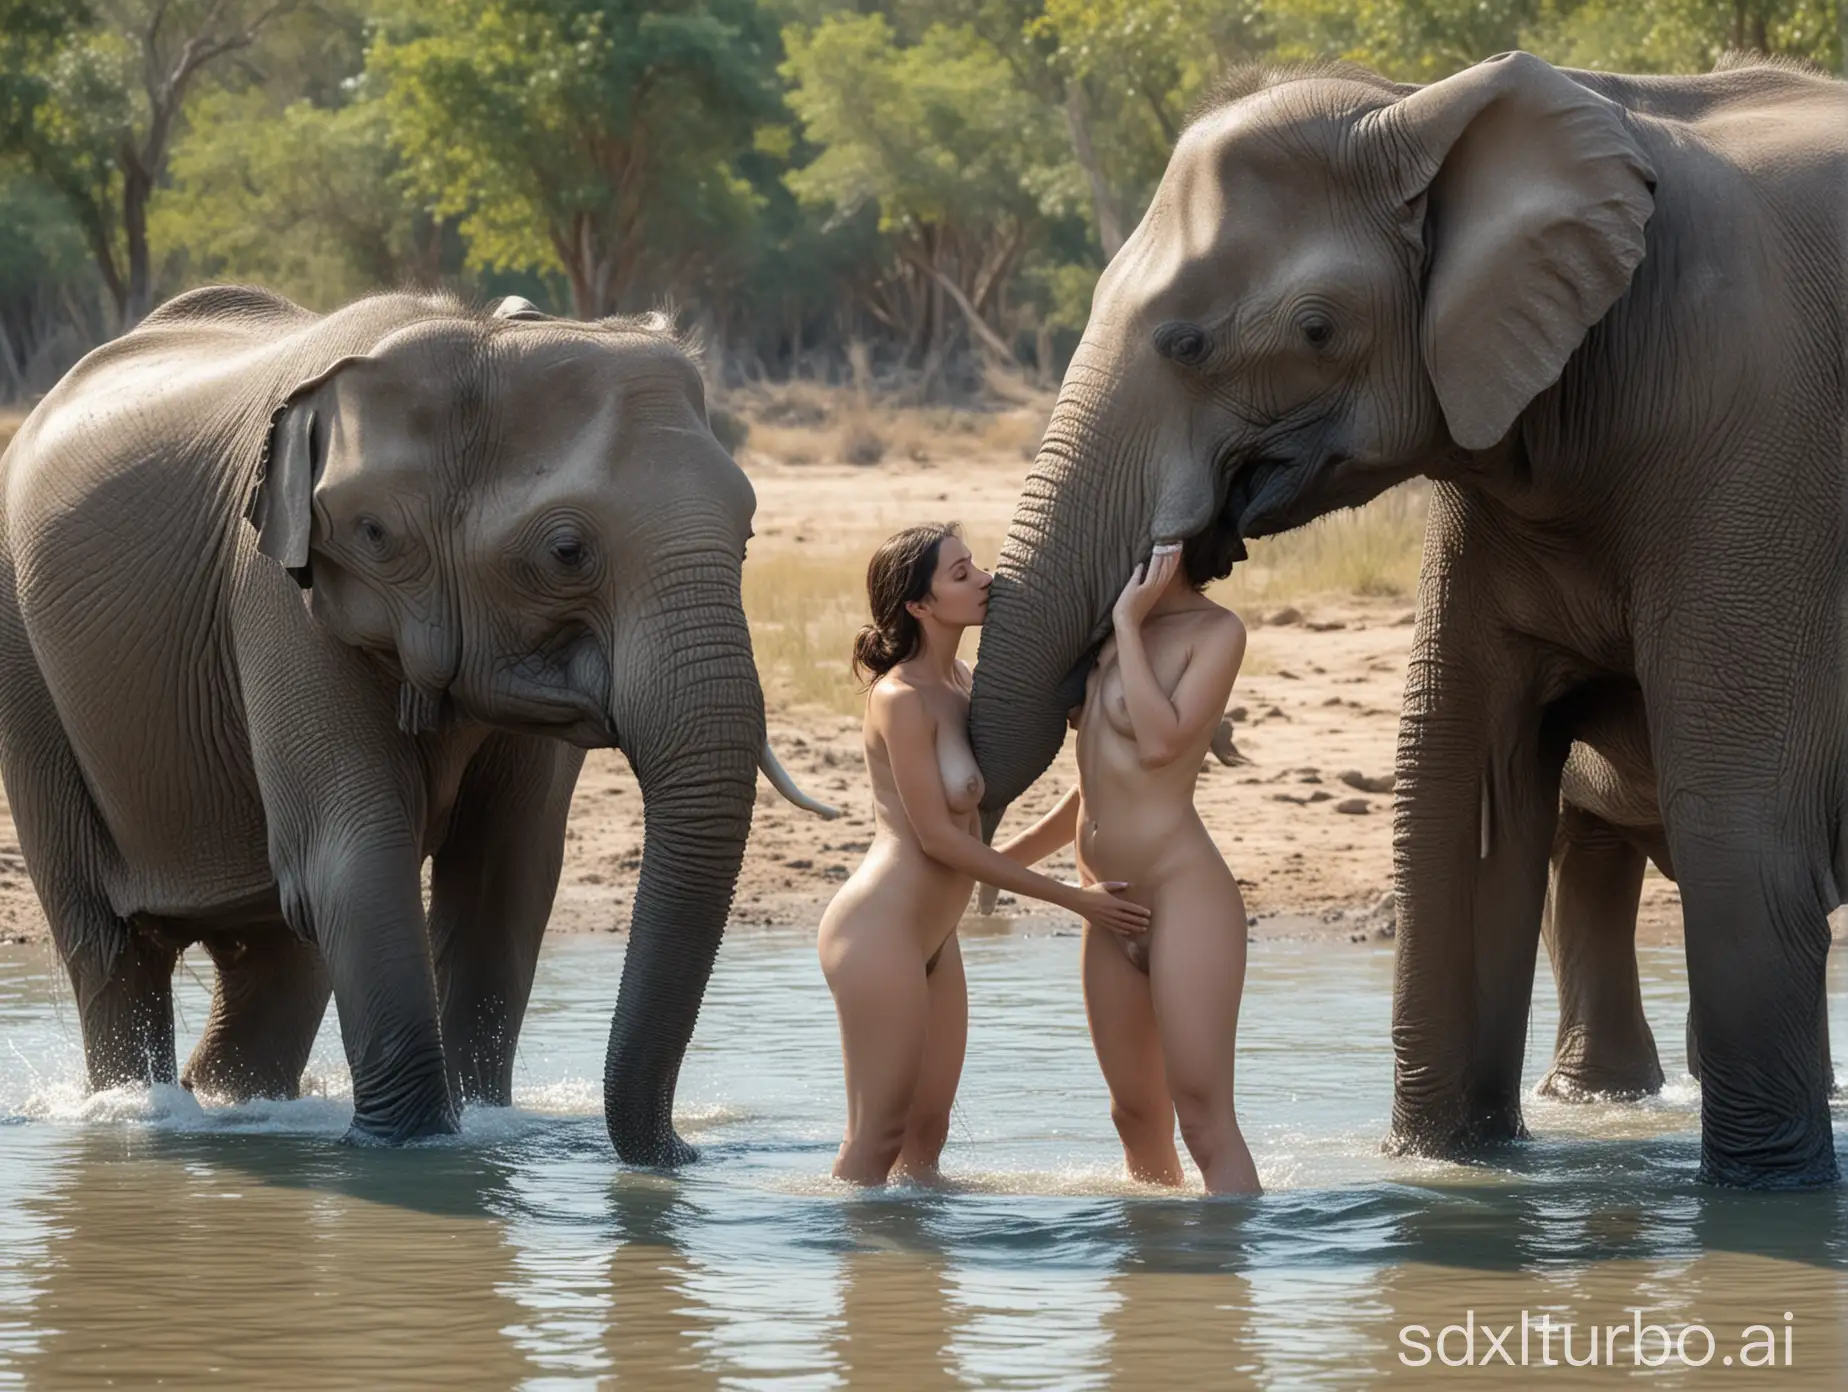 rocky pebble river. blue water. a beautiful angelic woman in her 20s giving bath to her pet elephant. Elephant is standing huge and majestic. the woman is nude and we see her from the side. she has her hands on elephant's front.